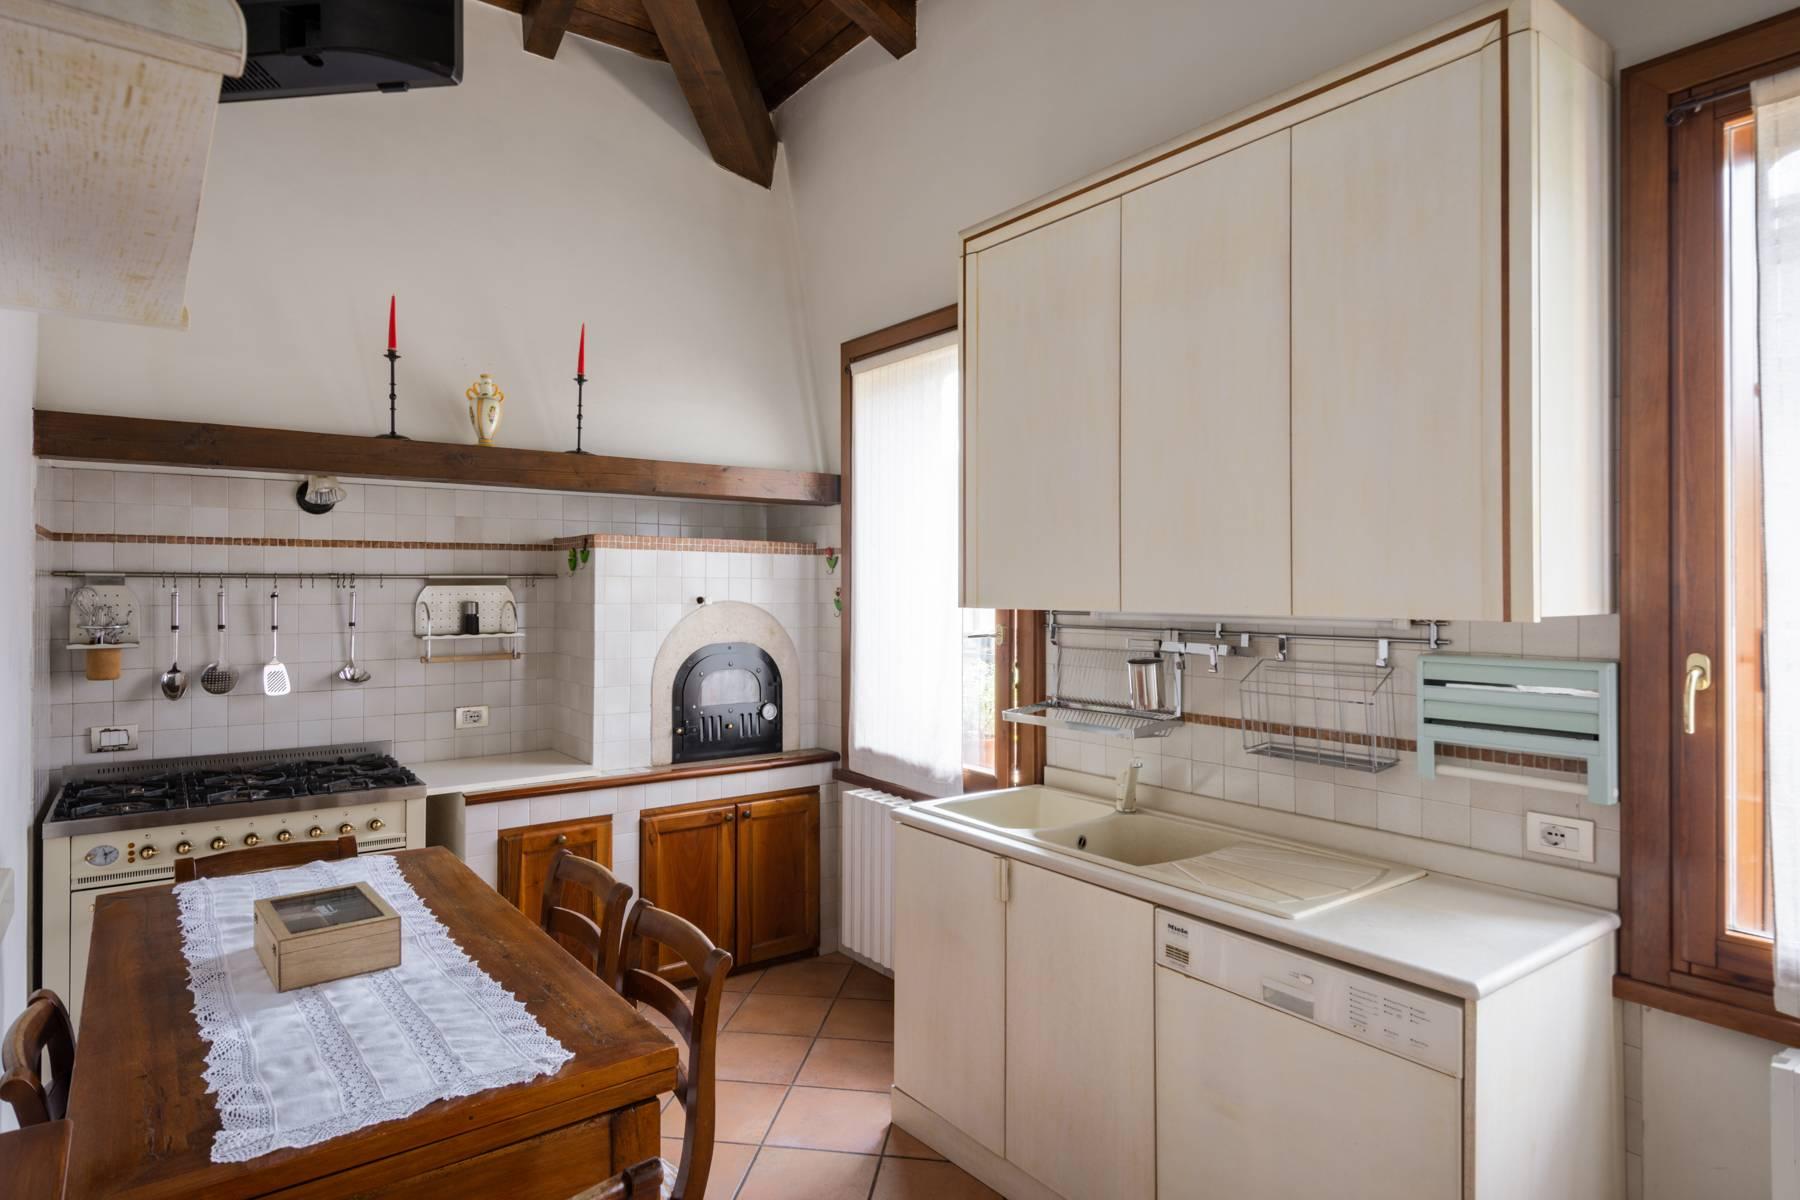 Stunning penthouse in liberty Villa just few minutes from Verona's historic center - 5